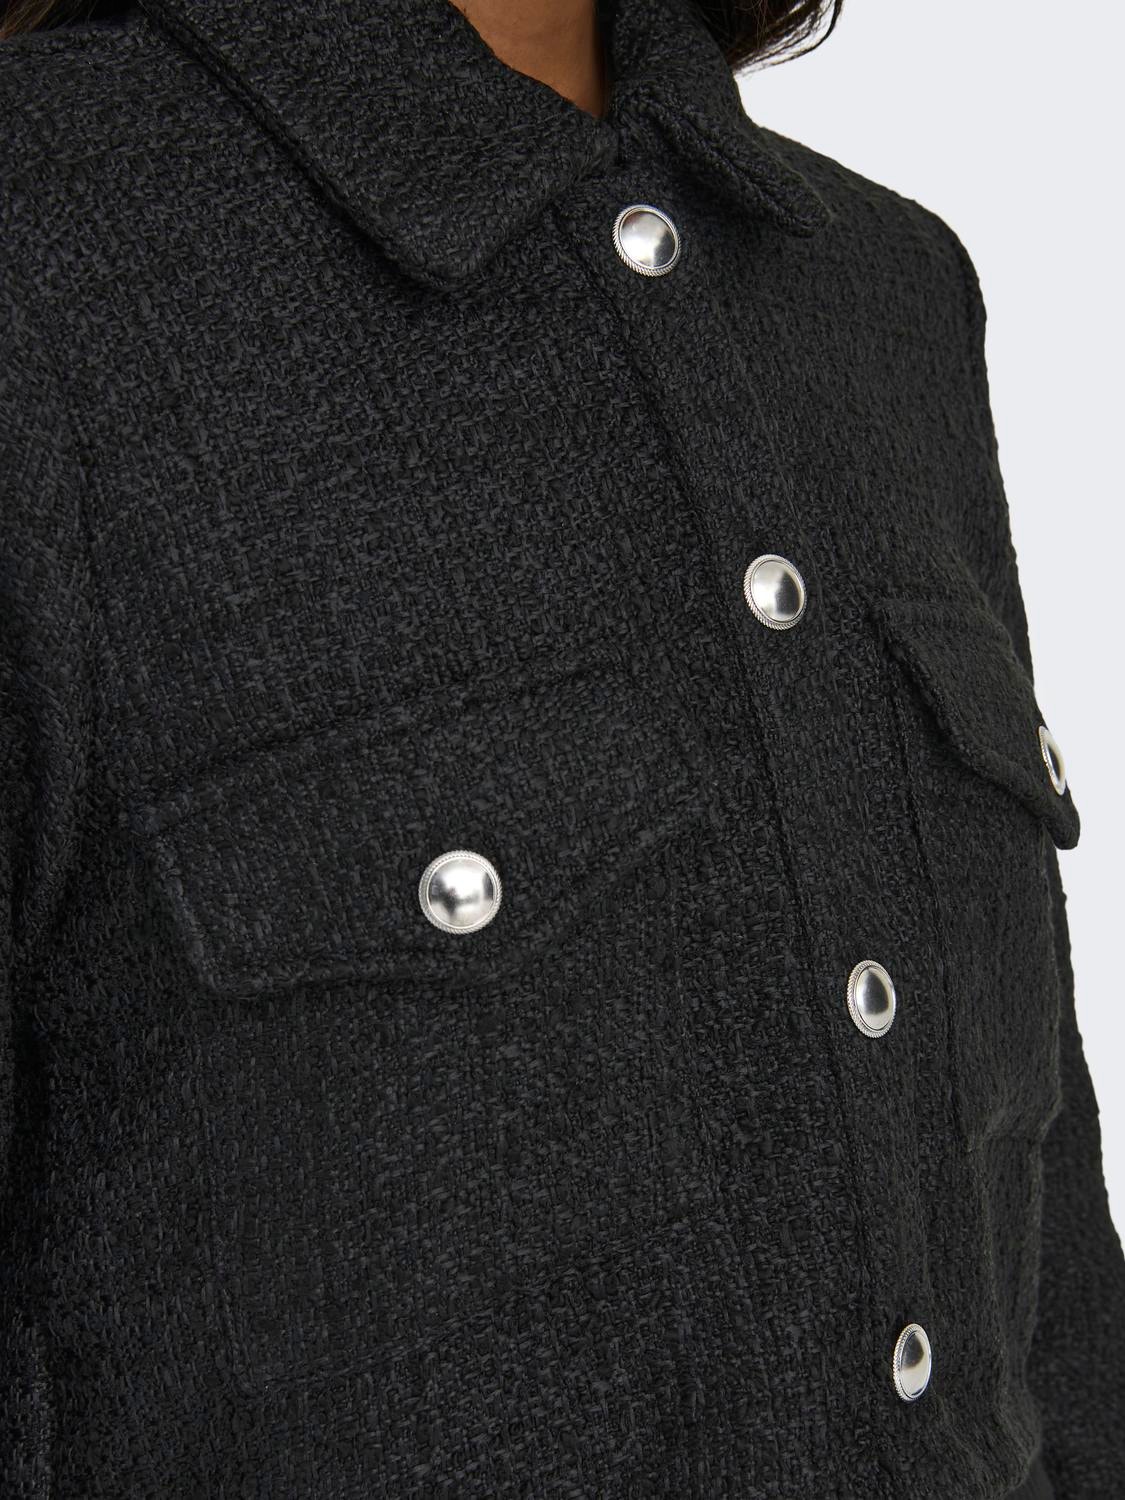 Short jacket with buttons | Black | ONLY®